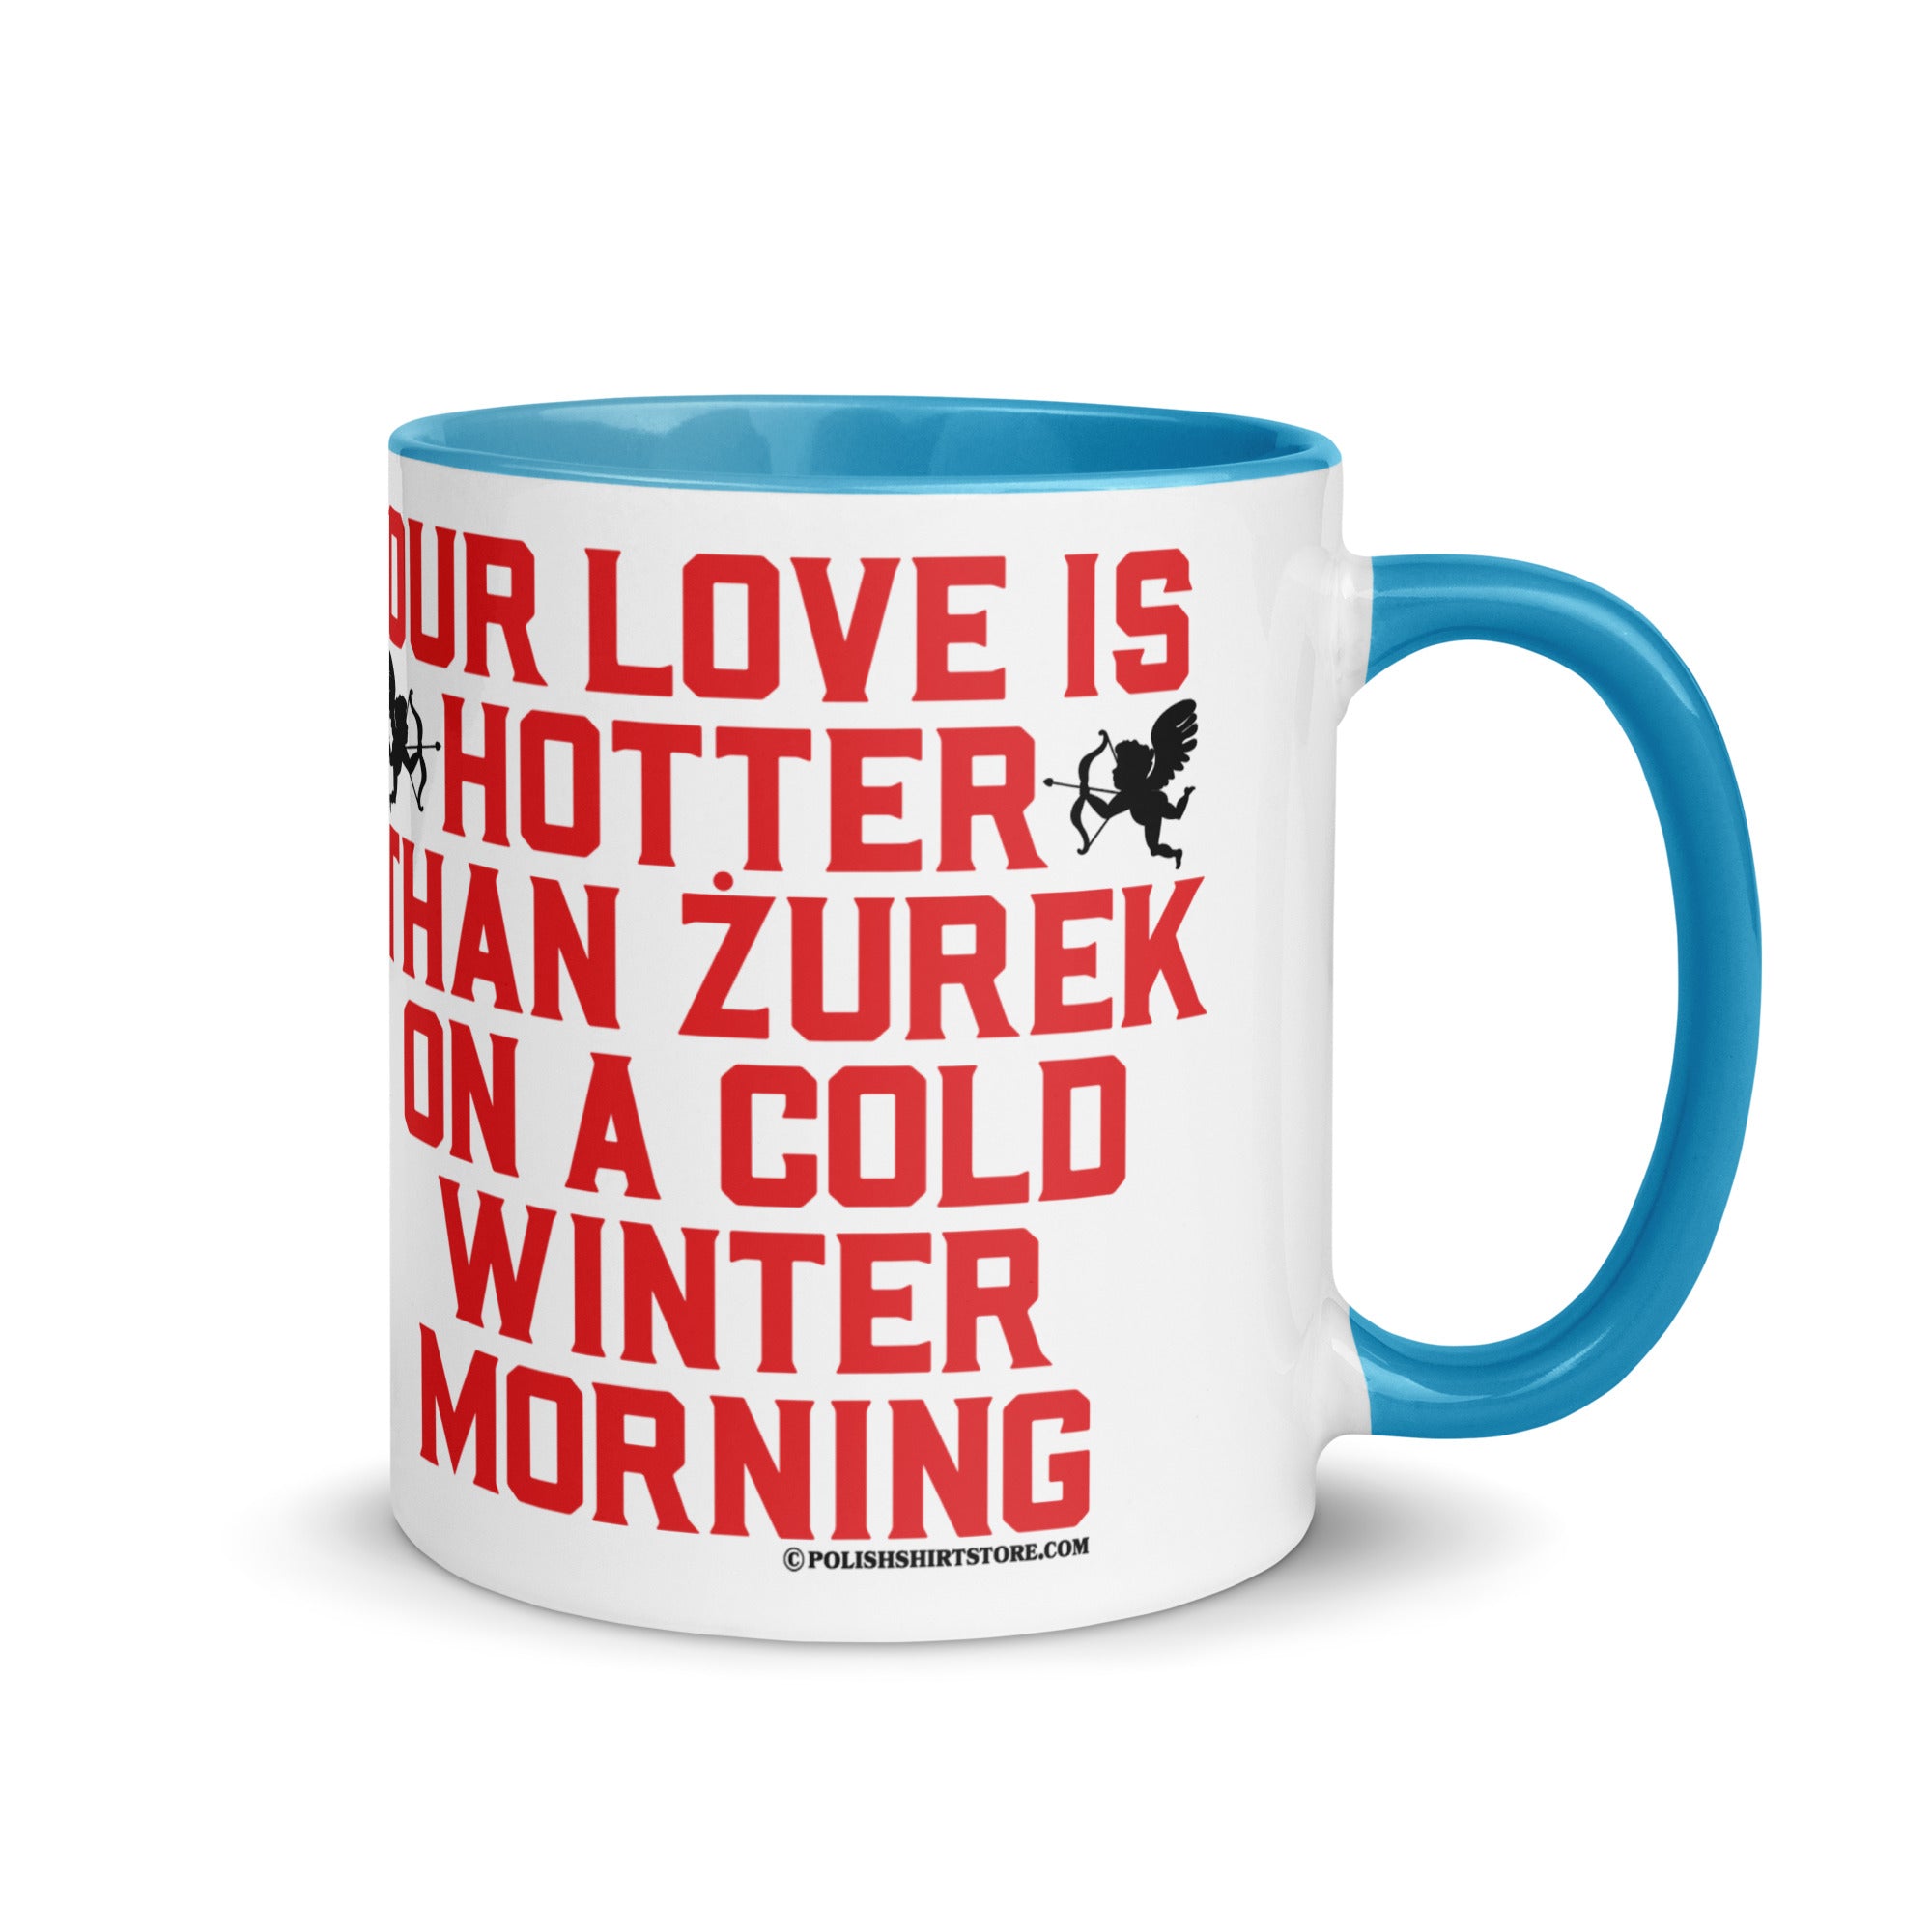 Our Love Is Hotter Than Zurek On A Cold Winter Morning Coffee Mug with Color Inside  Polish Shirt Store Blue 11 oz 